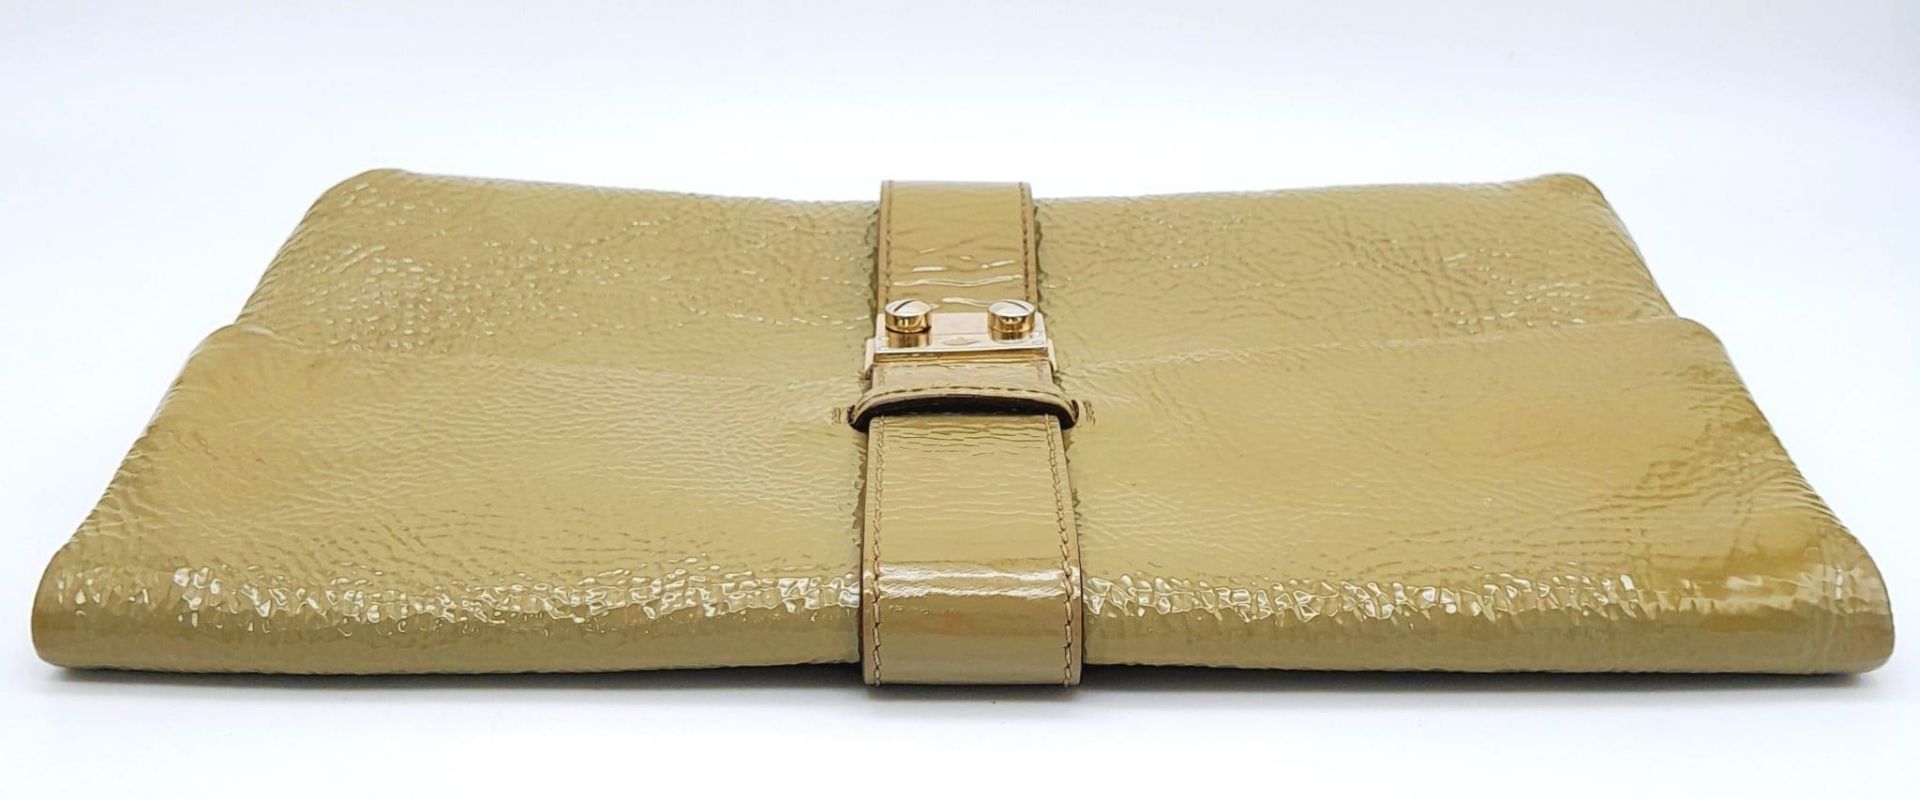 A Mulberry Harriet Khaki Leather Clutch Bag. Spongy patent leather exterior with gold-tone hardware, - Bild 5 aus 10